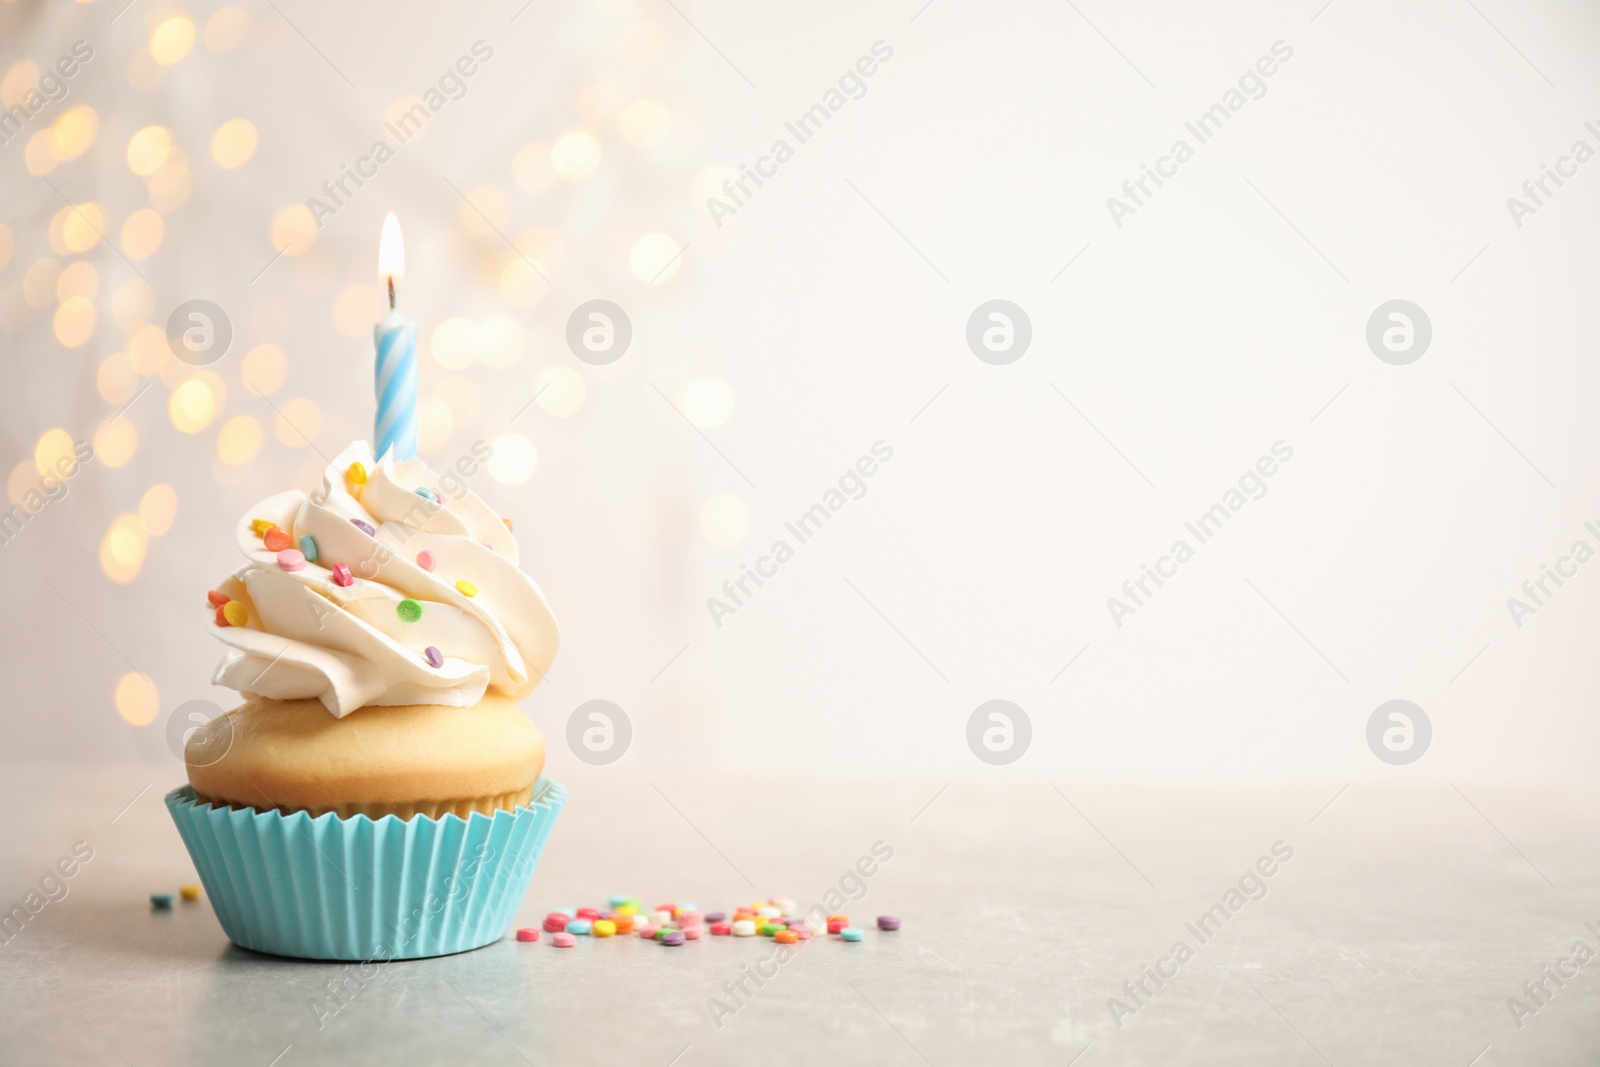 Photo of Birthday cupcake with candle on light grey table against blurred lights. Space for text